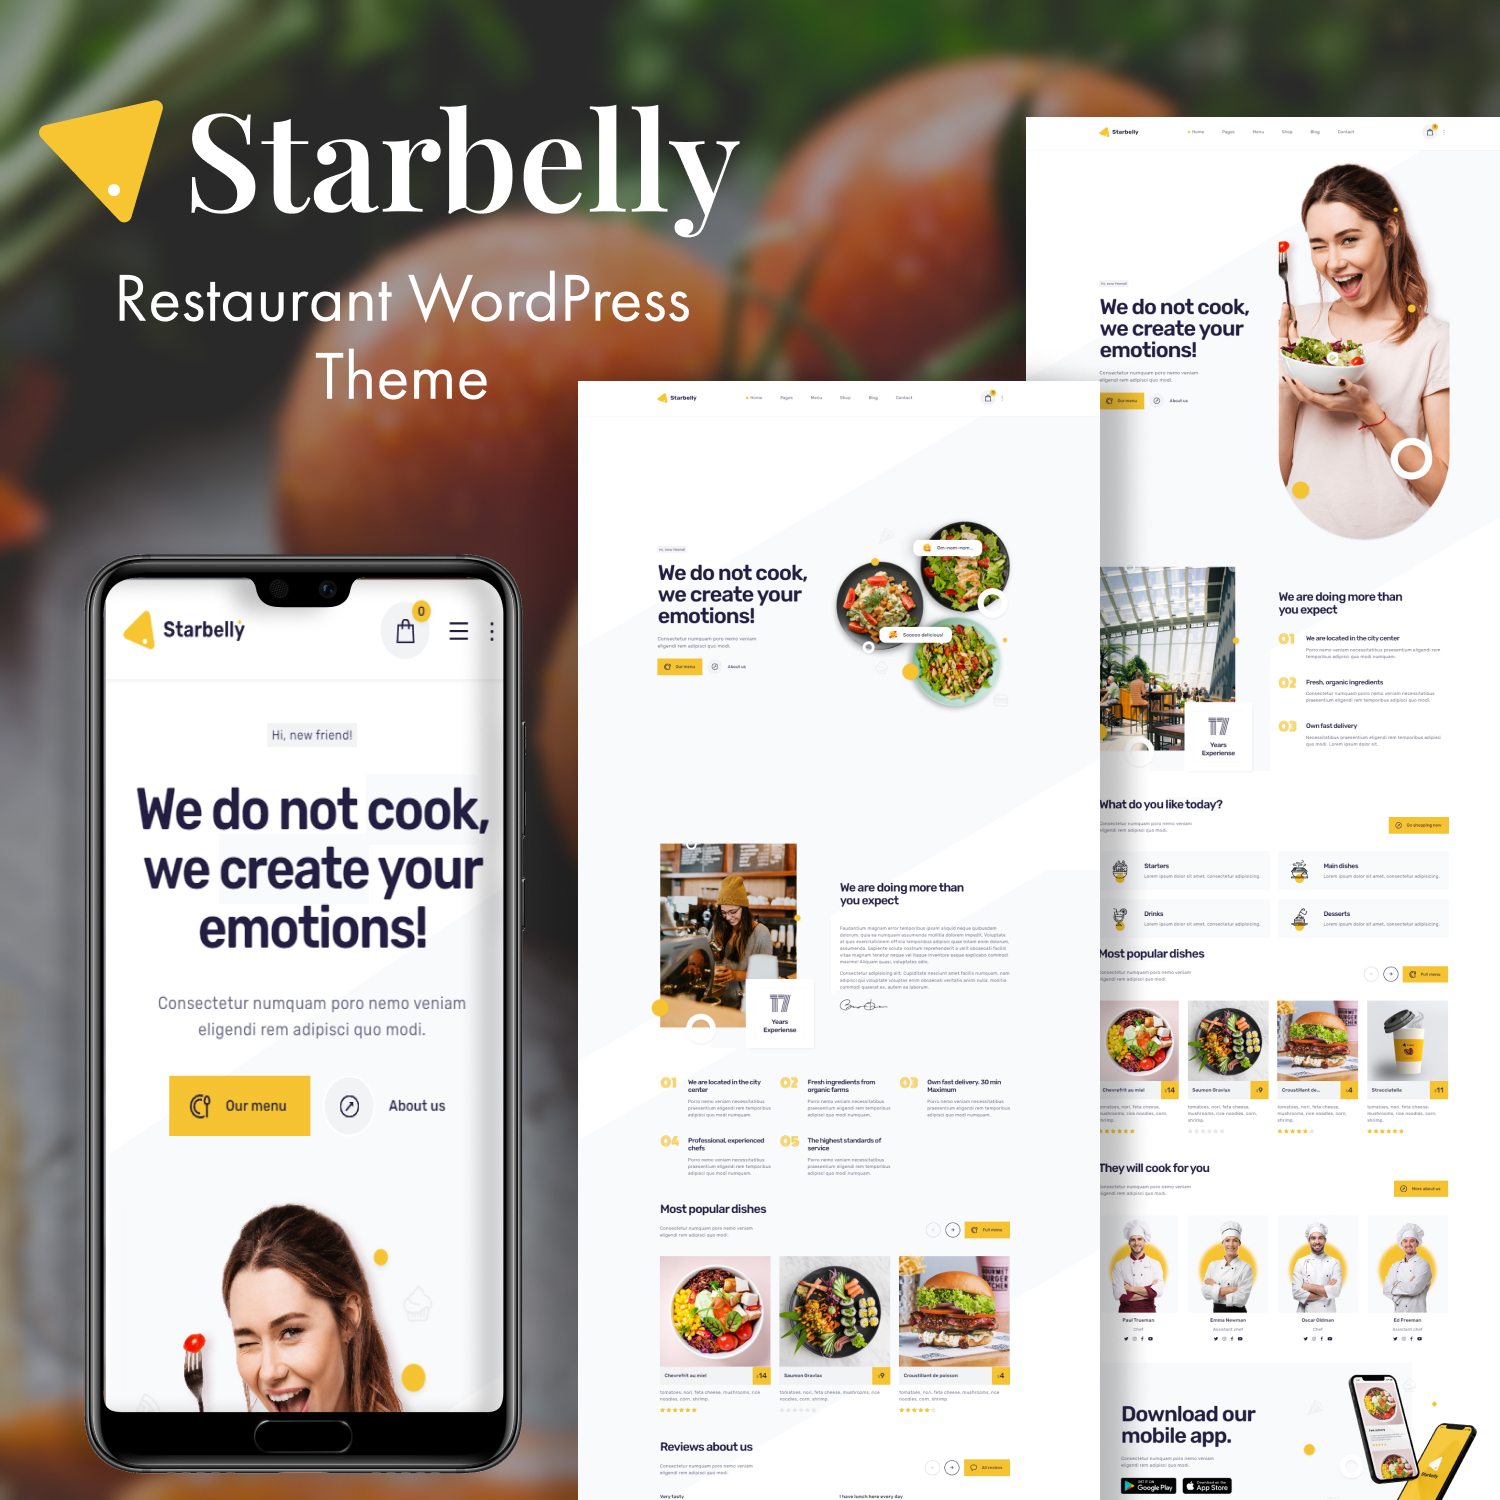 Images with starbelly restaurant wordpress theme.